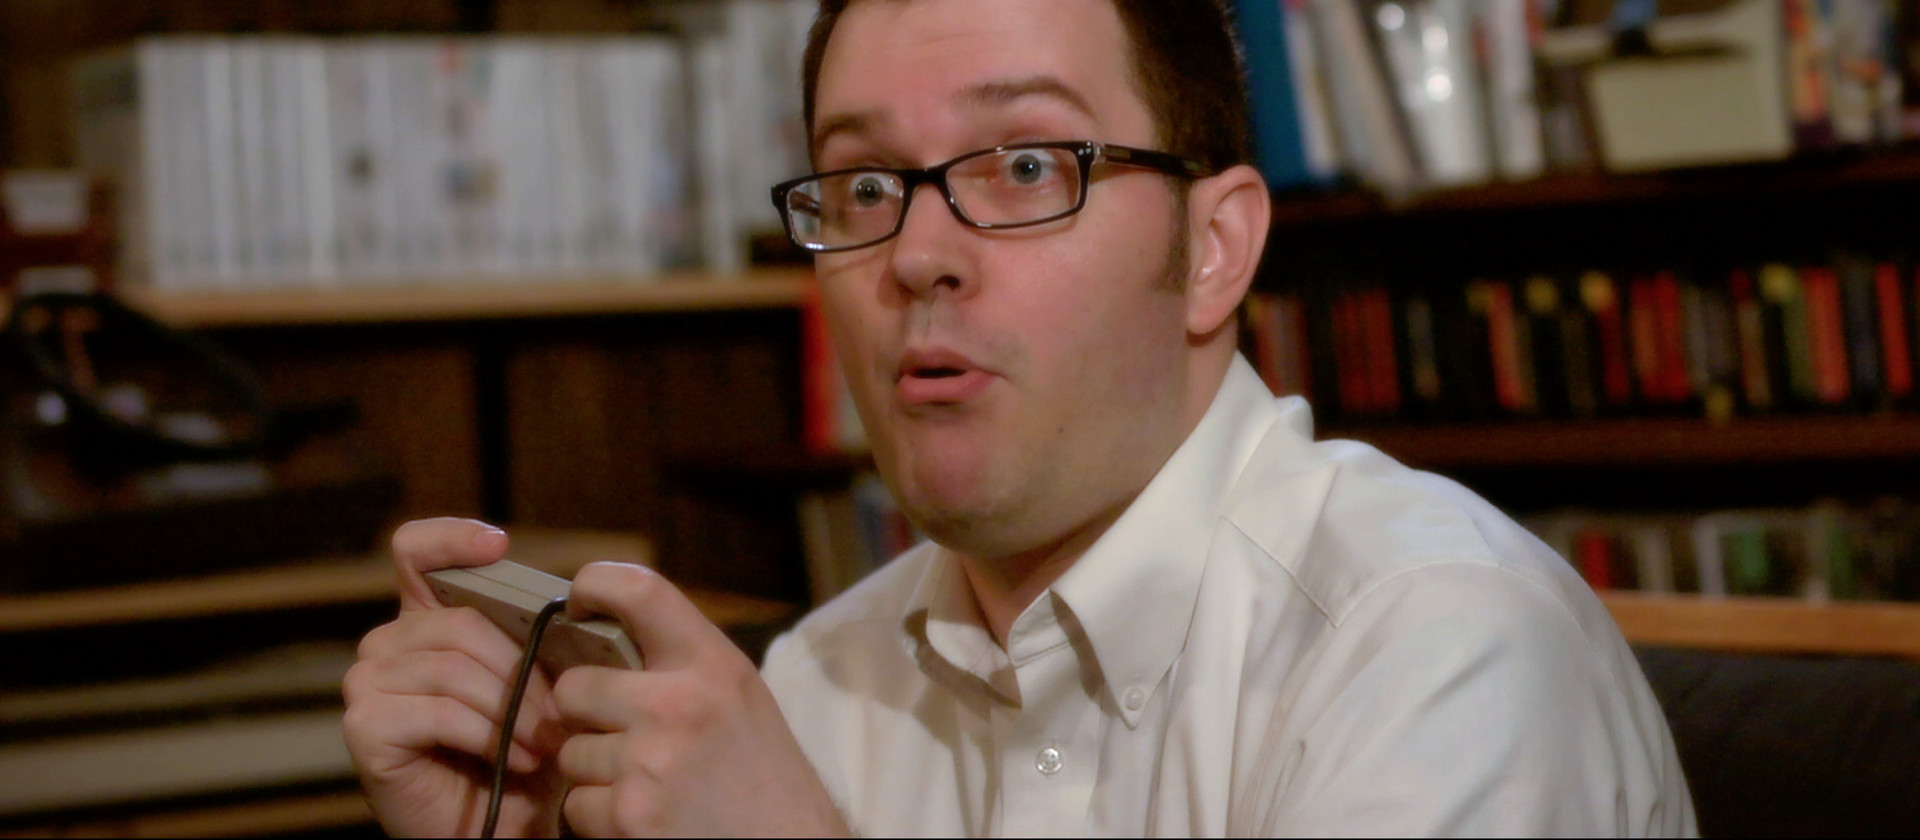 What were they thinking?!, The Angry Video Game Nerd